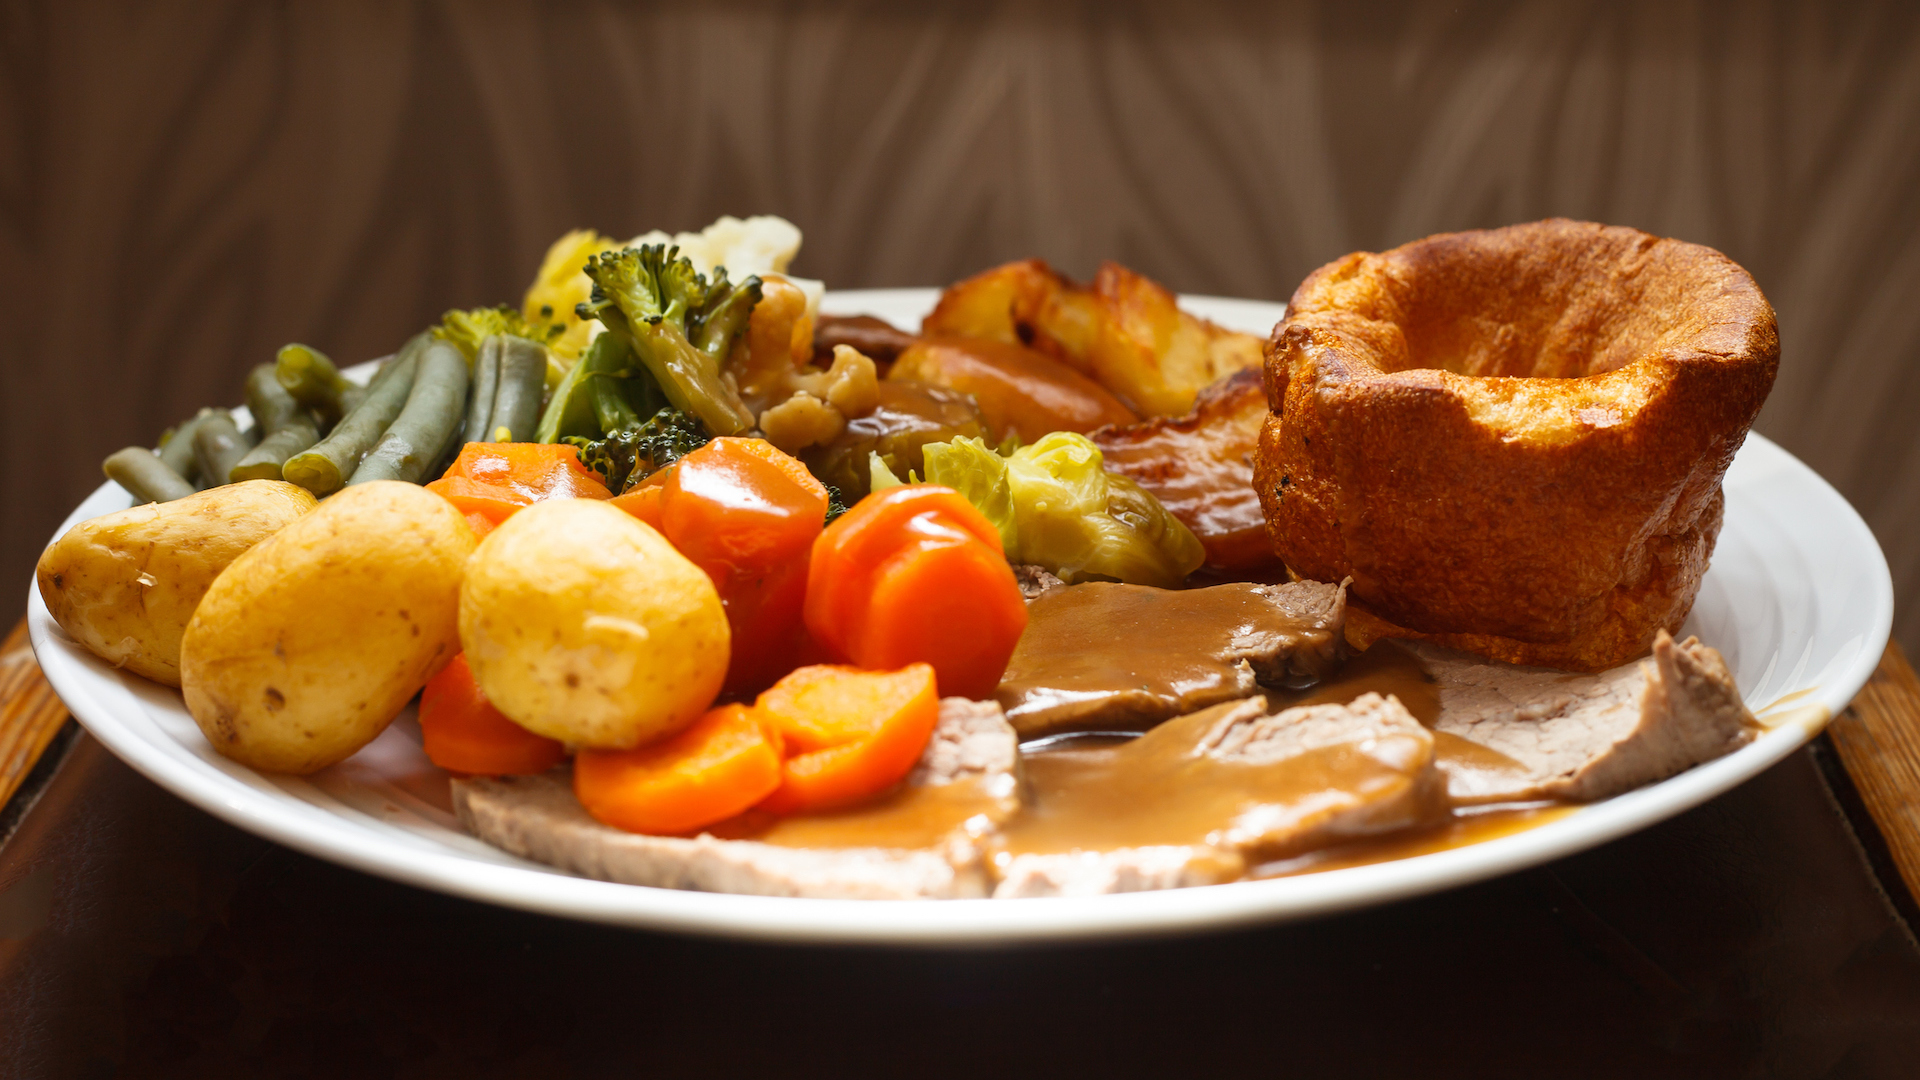 Roast beef dinner with Yorkshire pudding